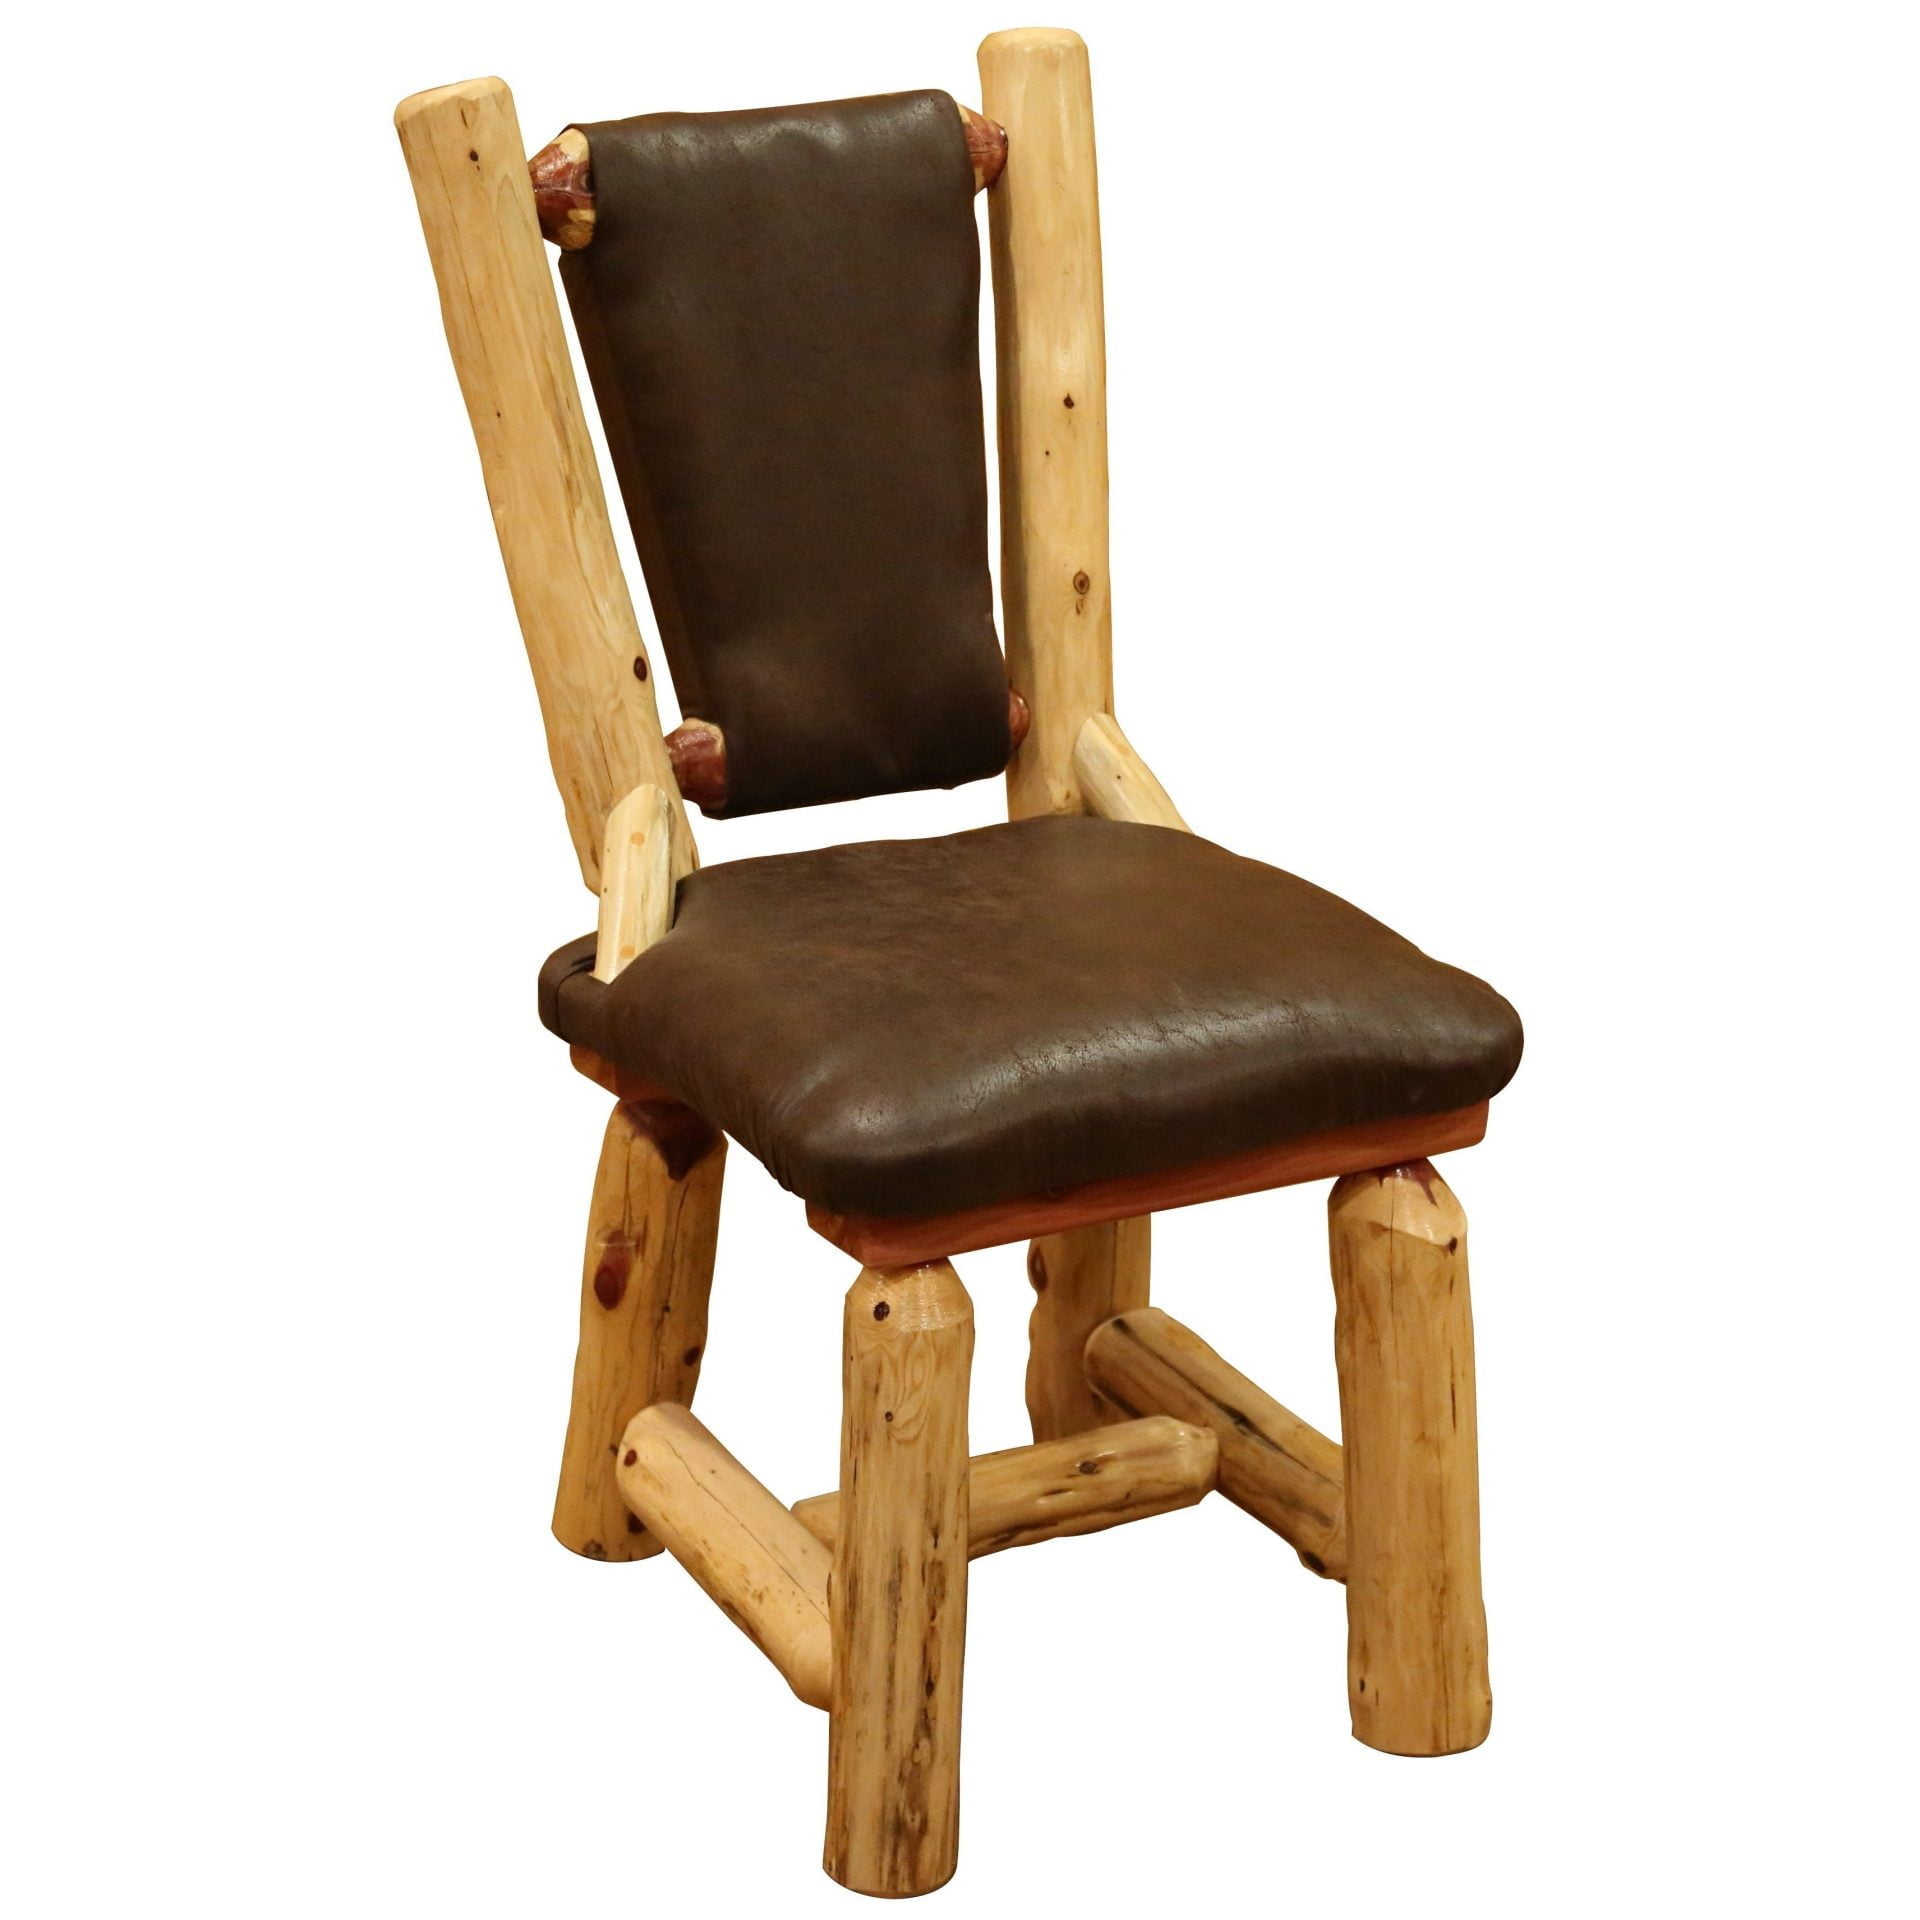 Rustic Red Cedar Log Upholstered Dining Chair